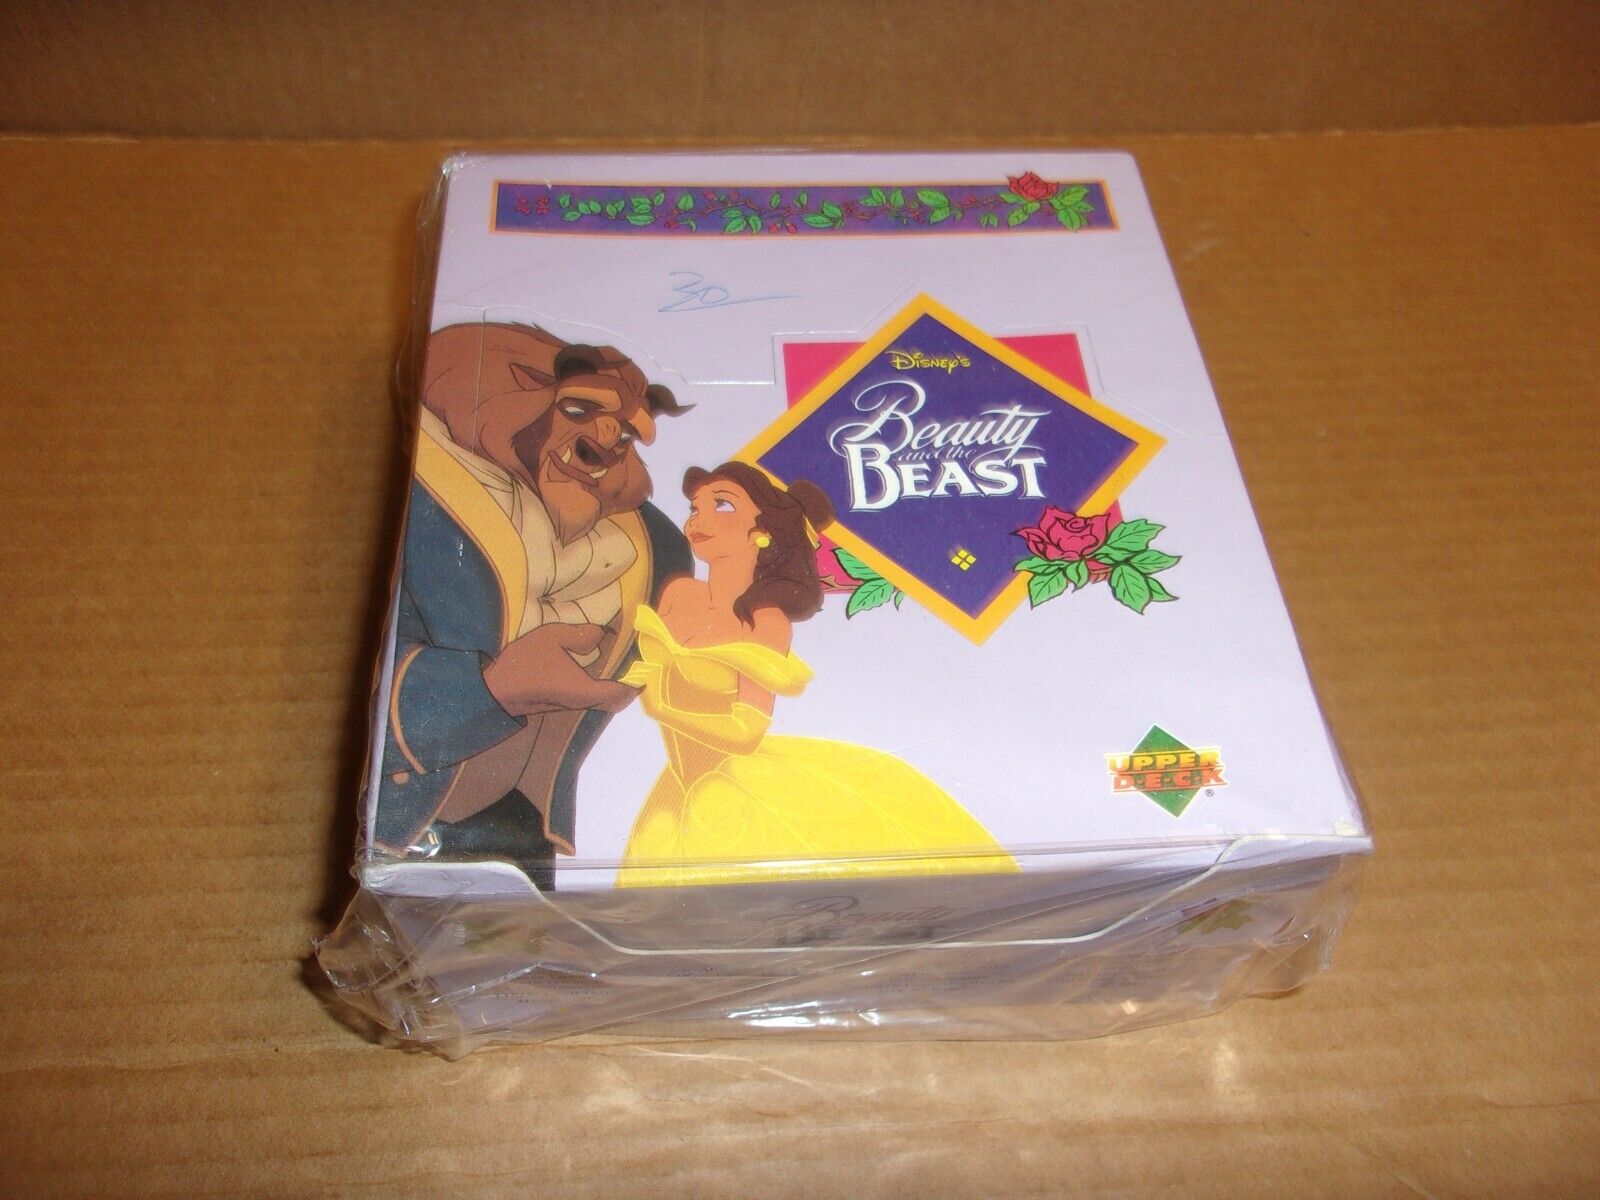 1992 Beauty and The Beast Upper Deck Trading Cards Box of Factory Sealed Packs